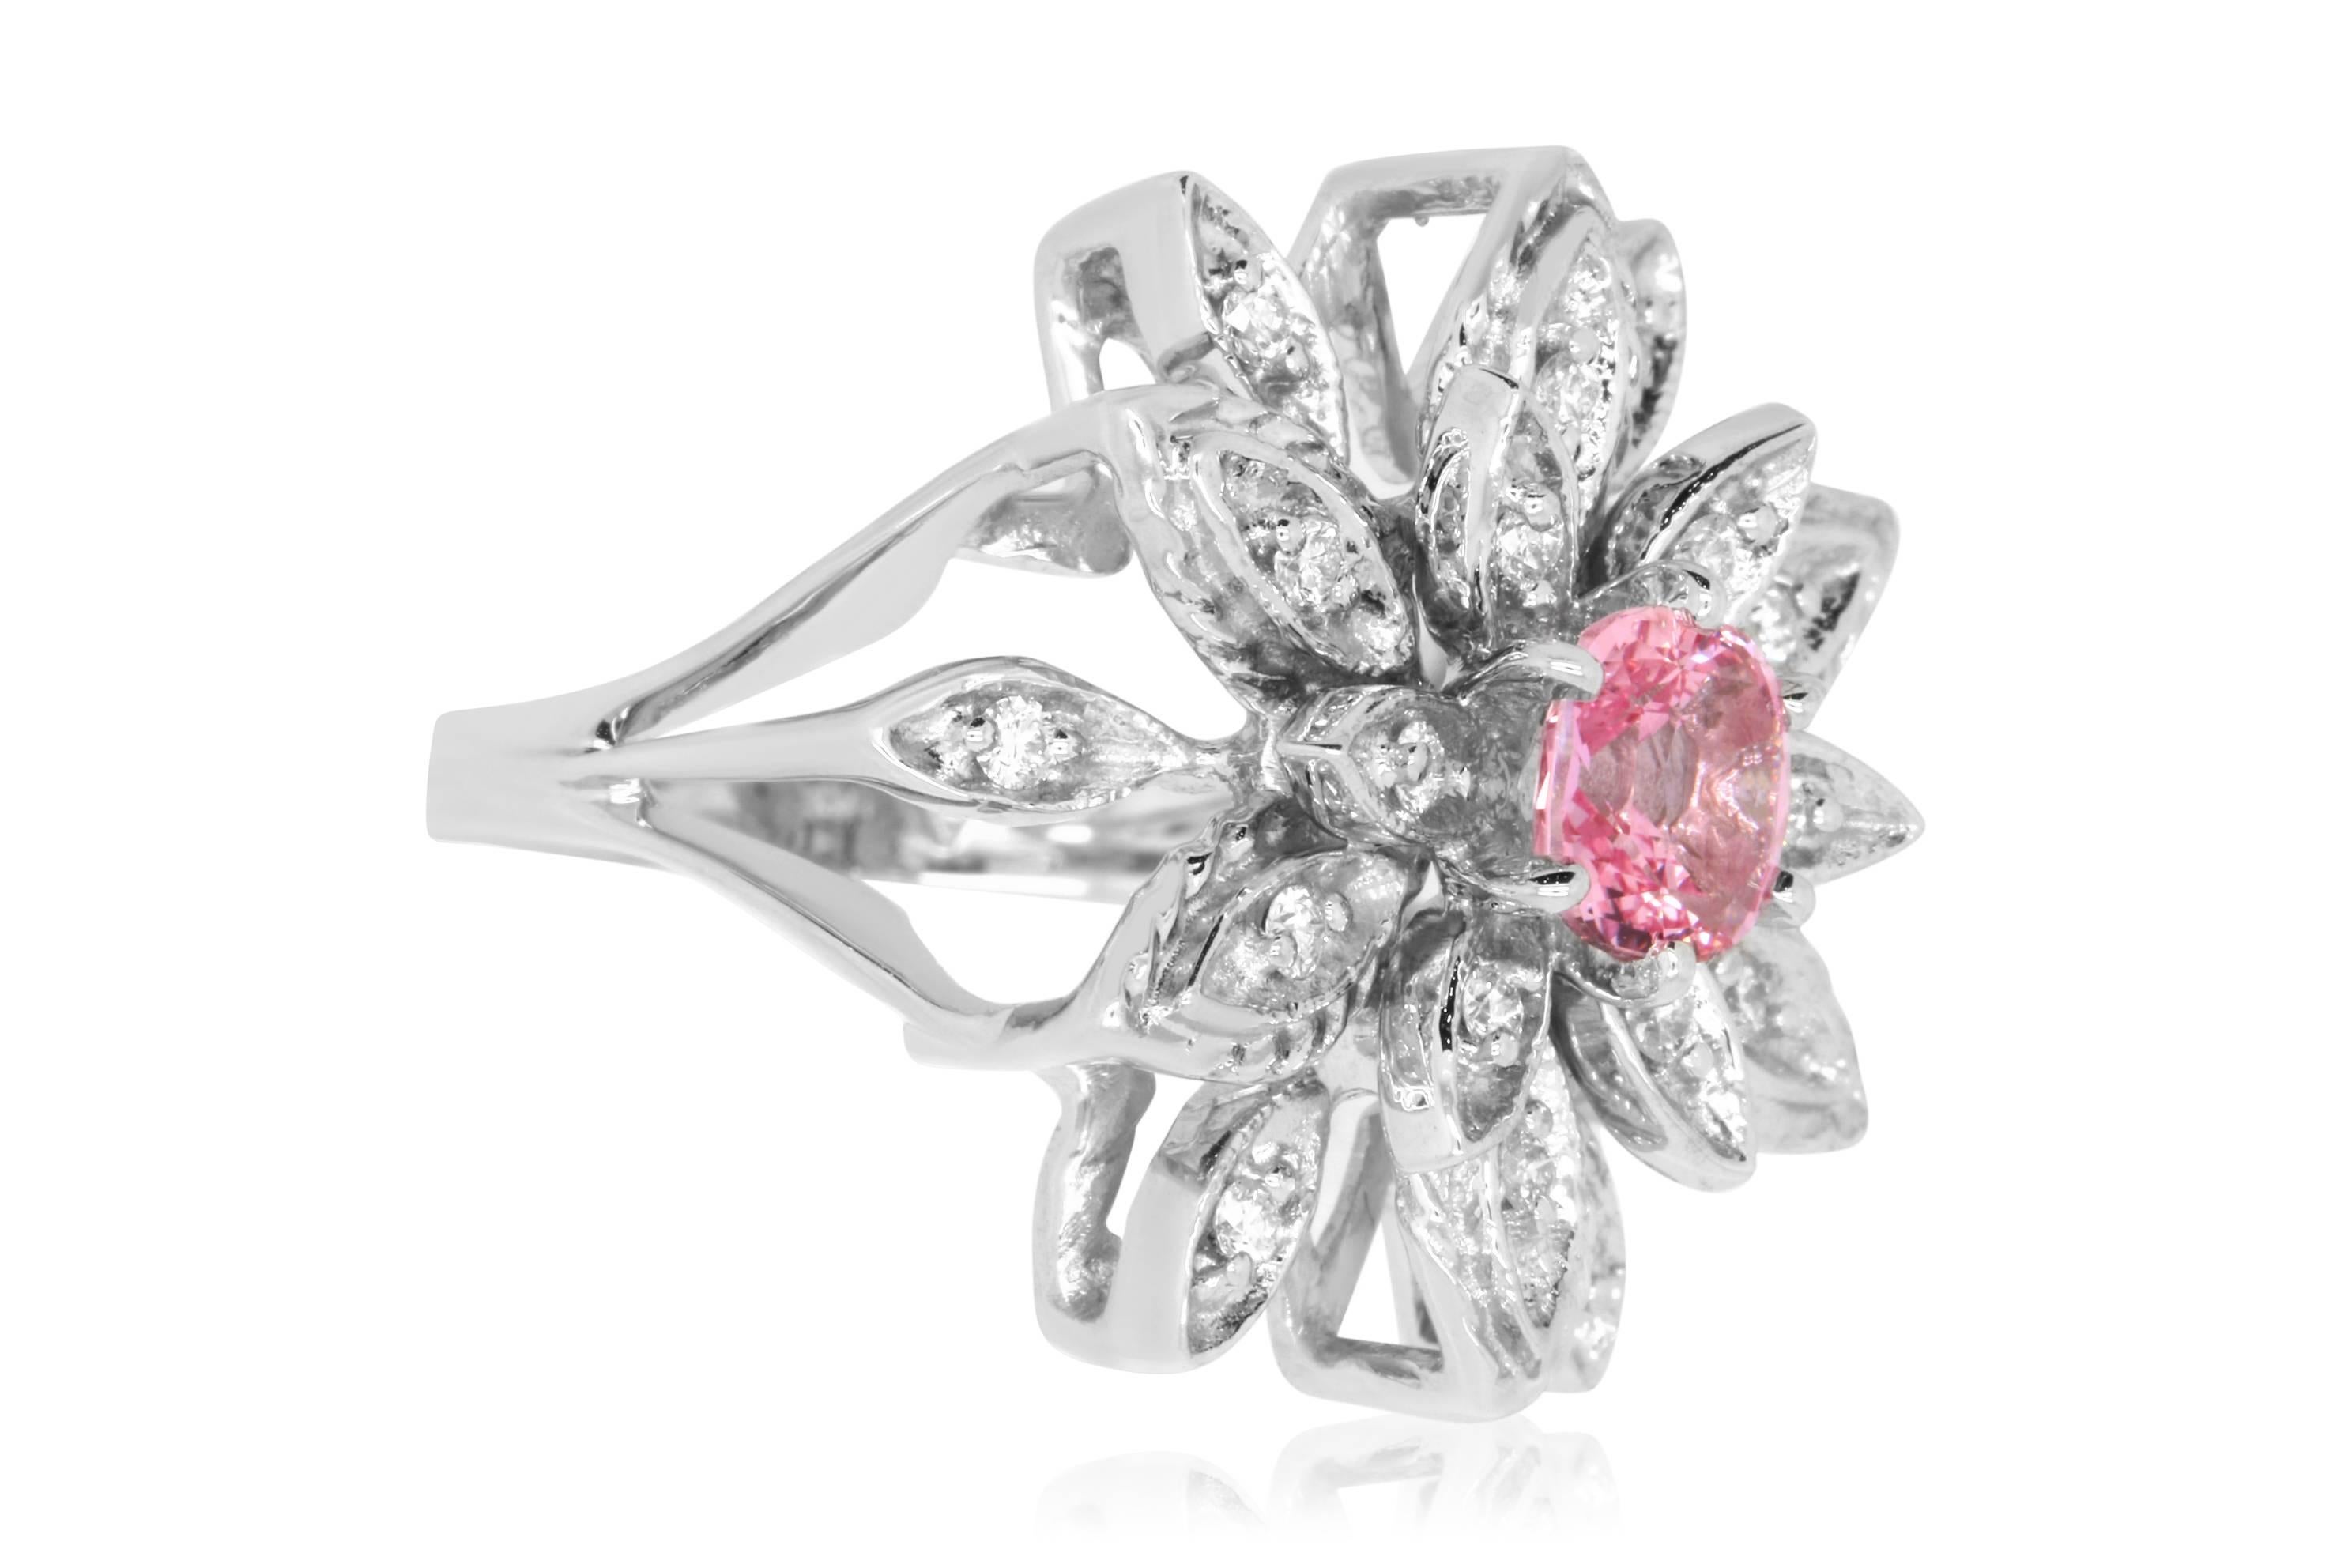 Material: 18k White Gold 
Center Stone Details:  1.16 Carat Padparadscha Sapphire
Mounting Diamond Details: 18 Round White Diamonds Approximately 0.30 Carats - Clarity: SI / Color: H-I
Ring Size: Size 6.5. Alberto offers complimentary sizing on all